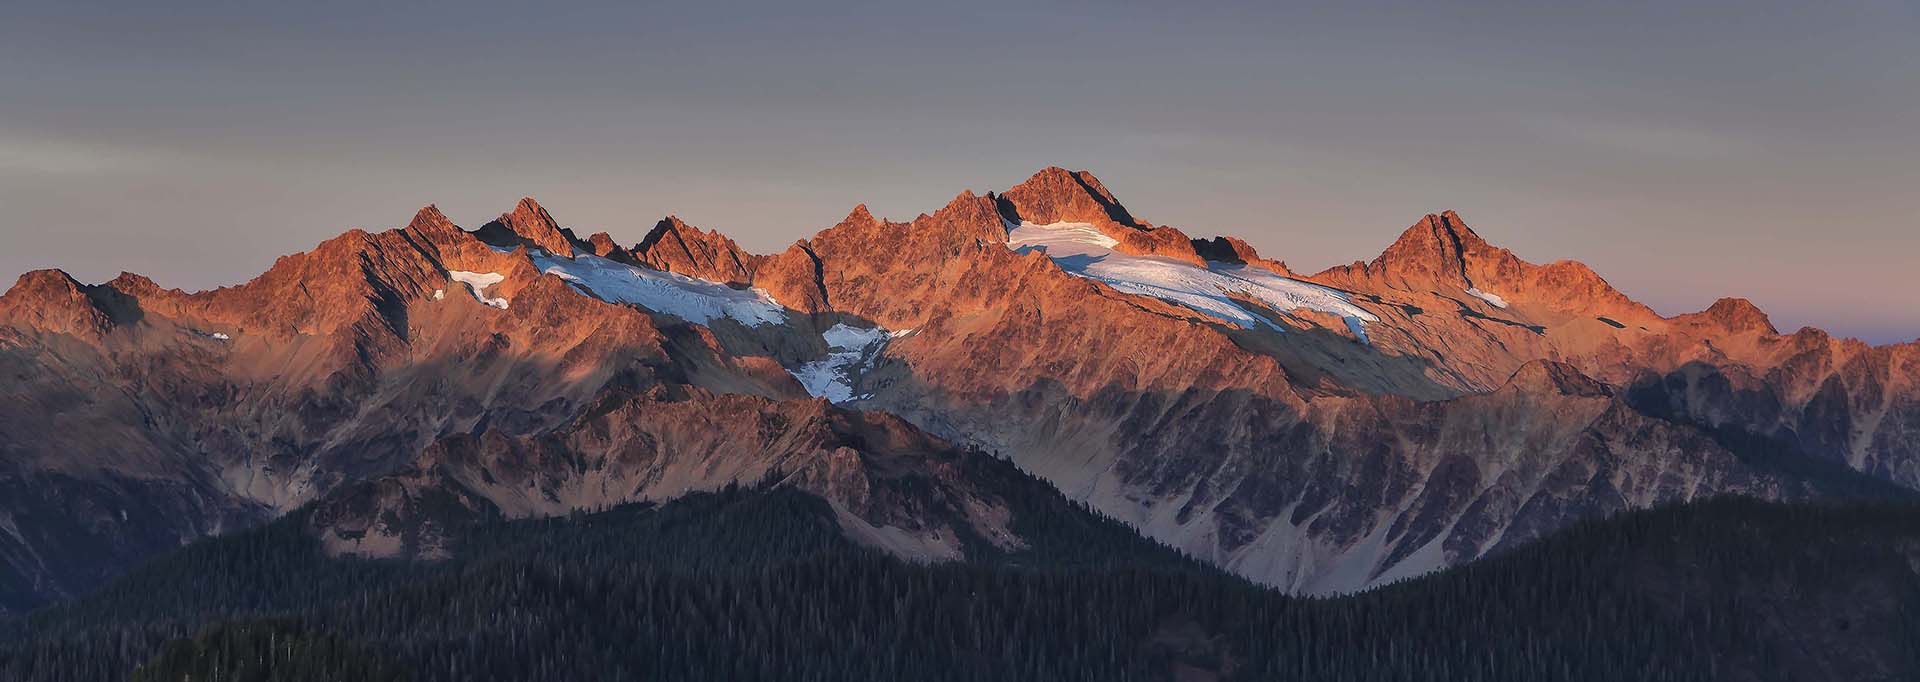 Twin Sisters, a red mountain range with snow pockets